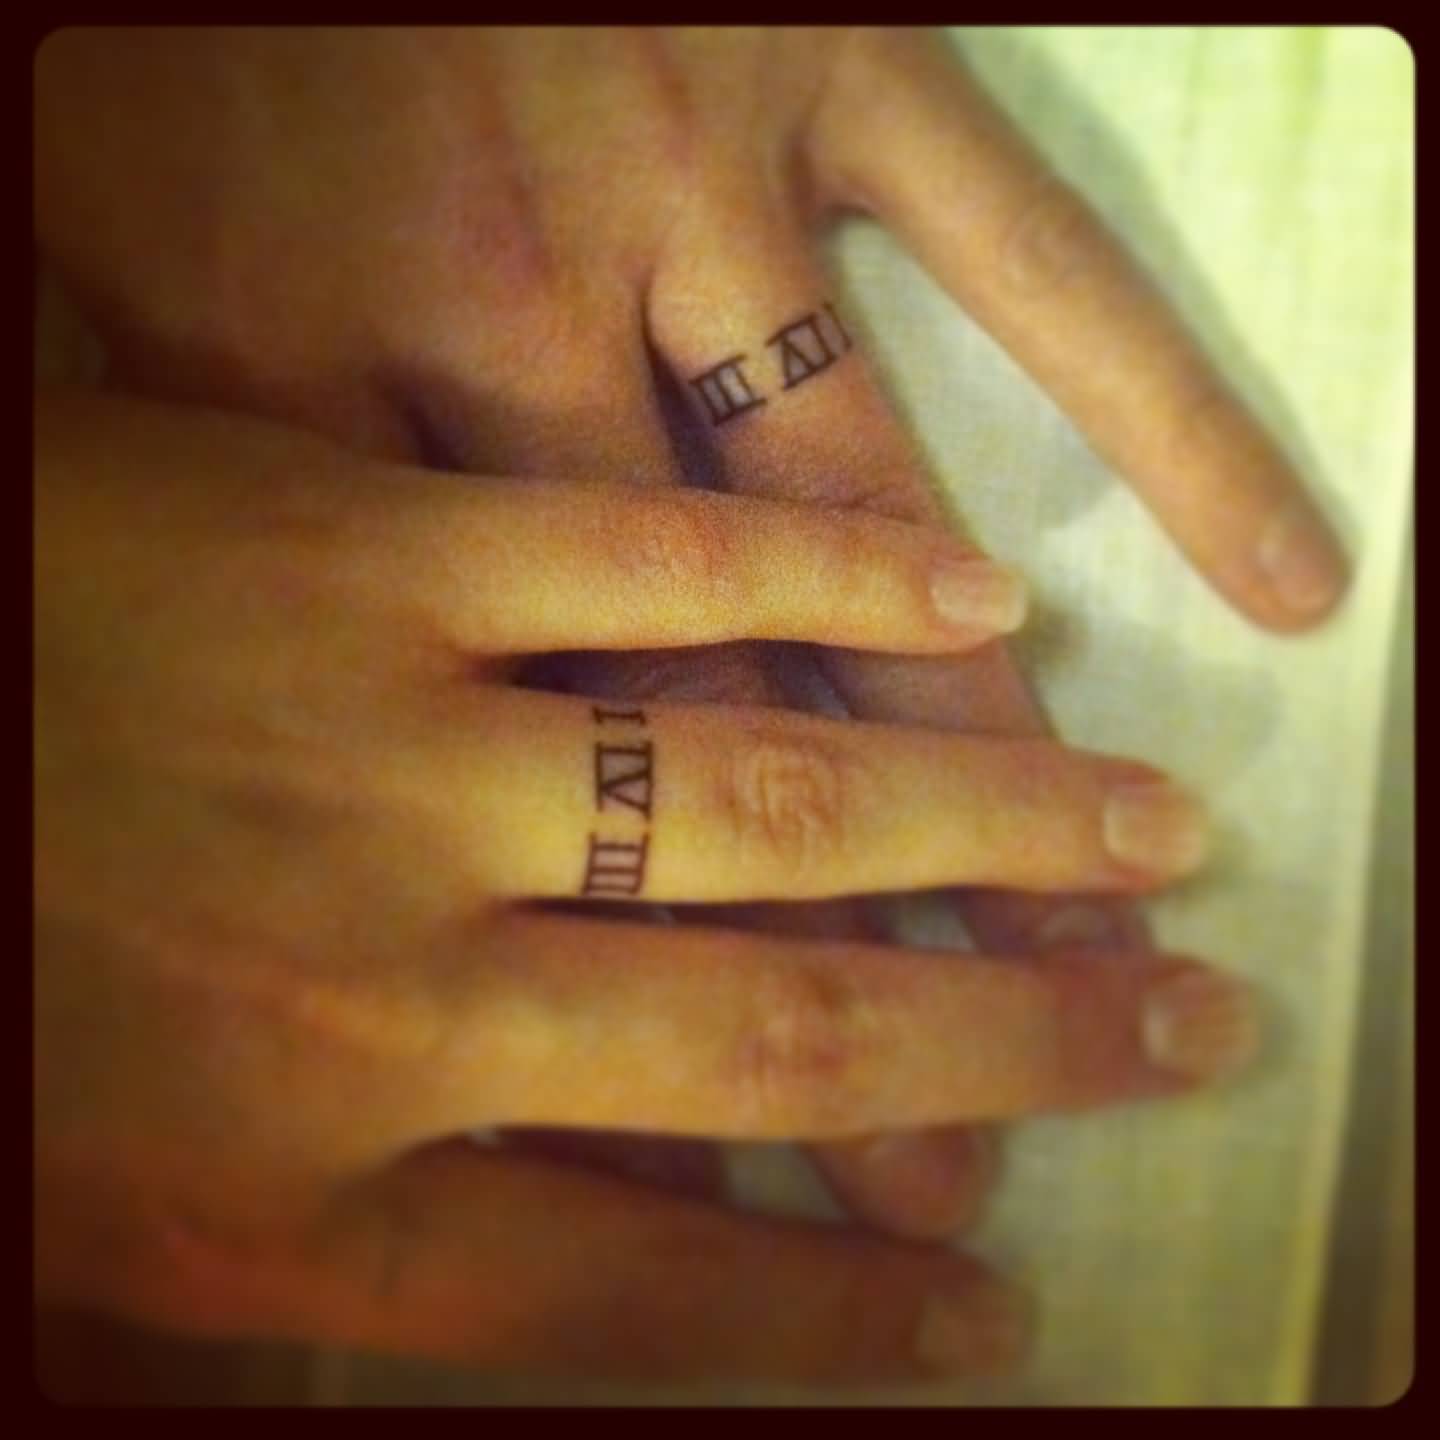 Matching Roman Numerals In Ring Shape Tattoos On Fingers